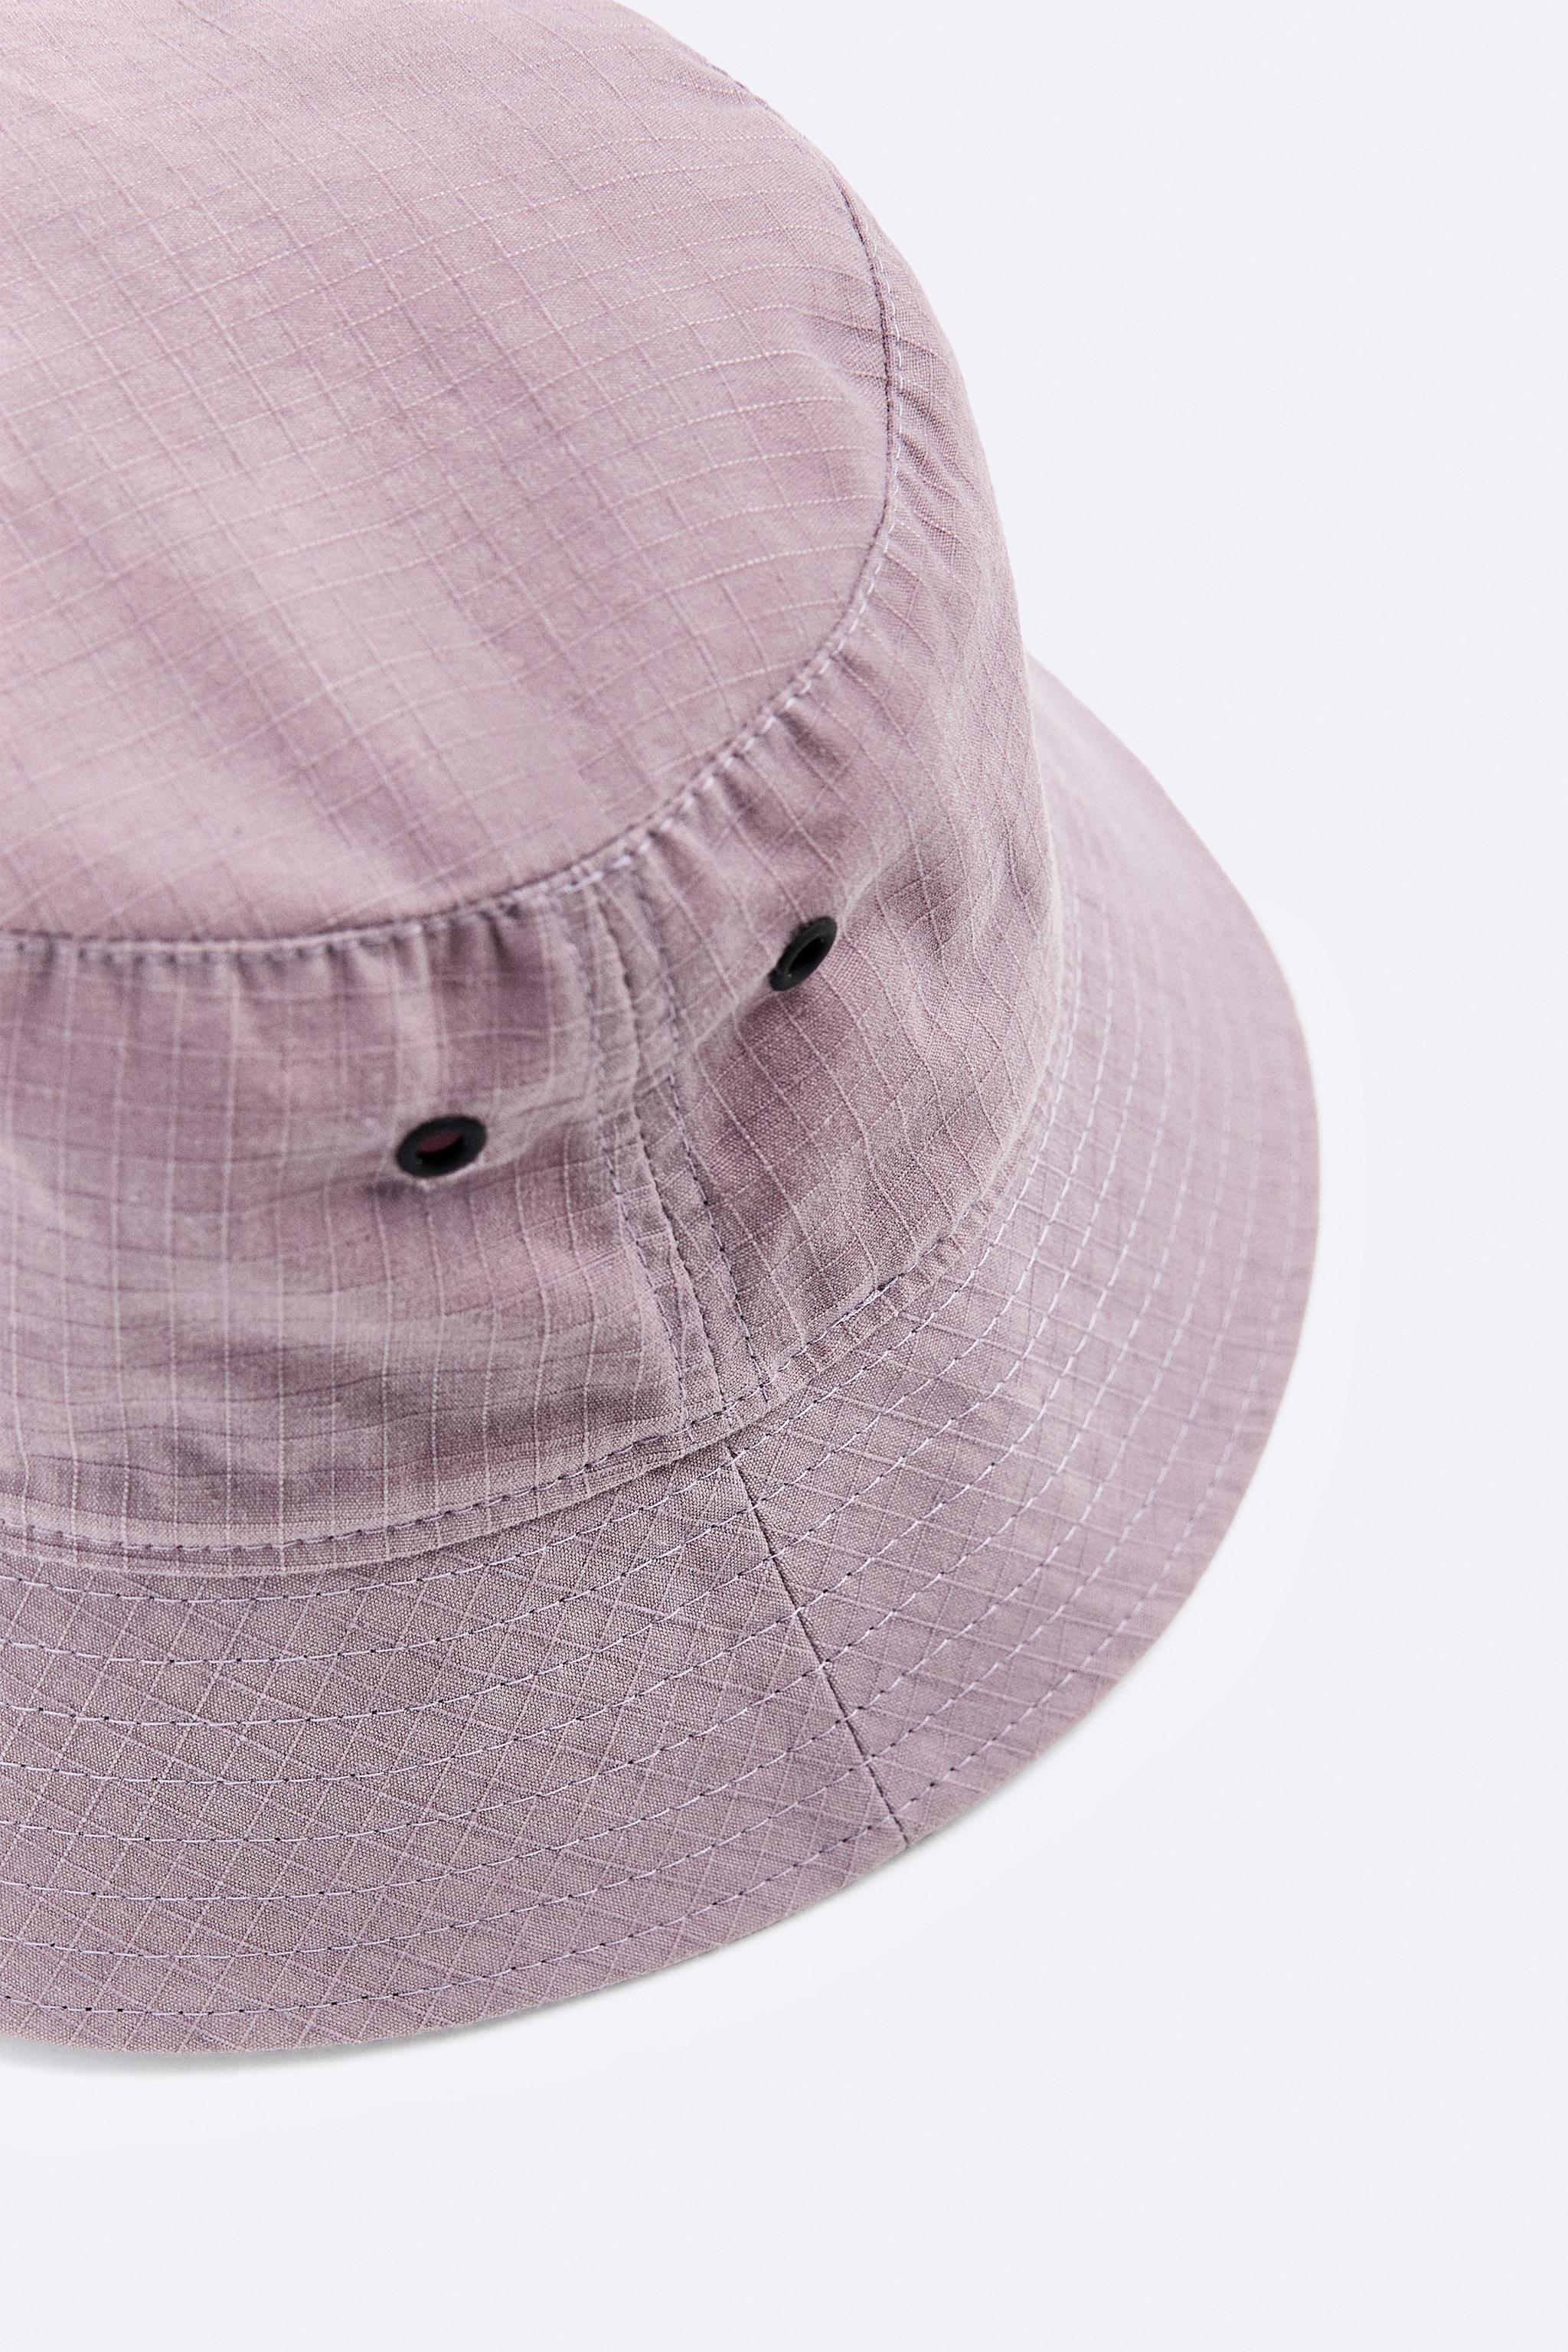 BUCKET HAT WITH POCKET - Brown / Taupe | ZARA United States